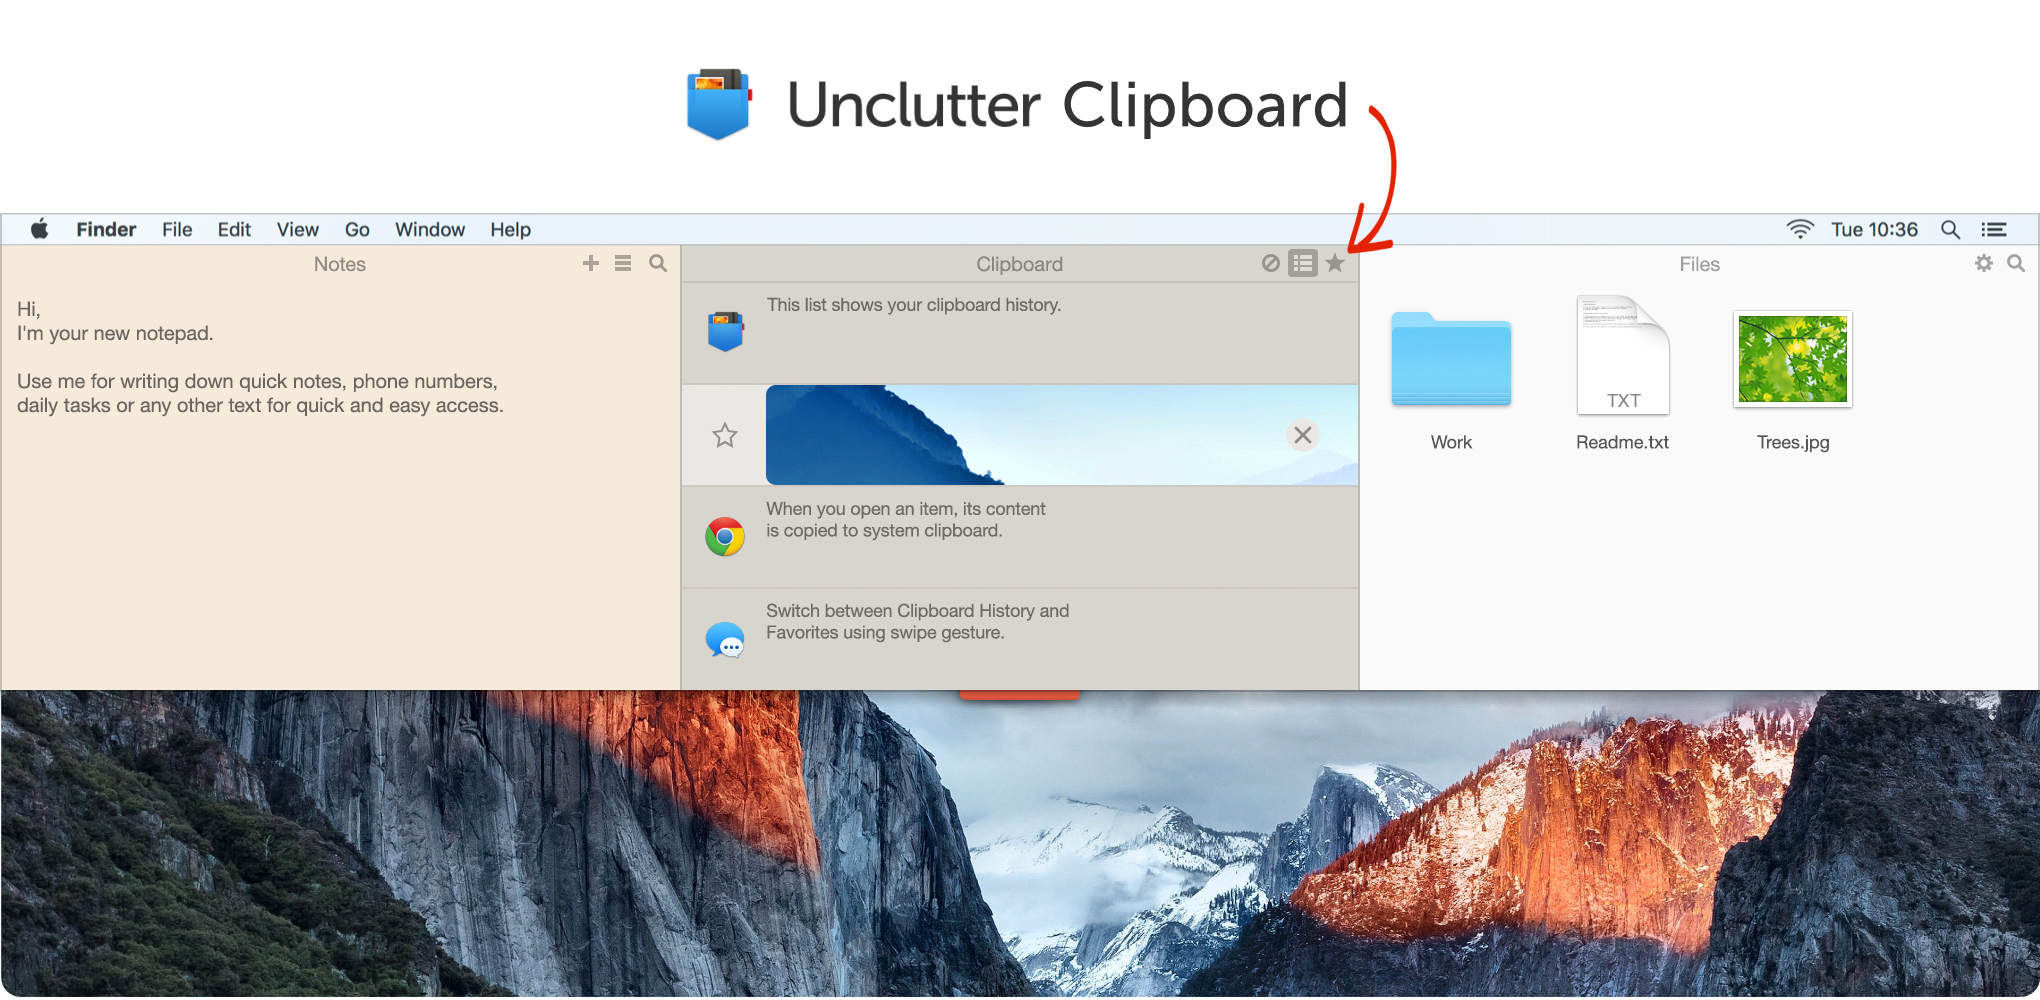 Unclutter Clipboard - Clipboard Manager with History and Favorites for Mac